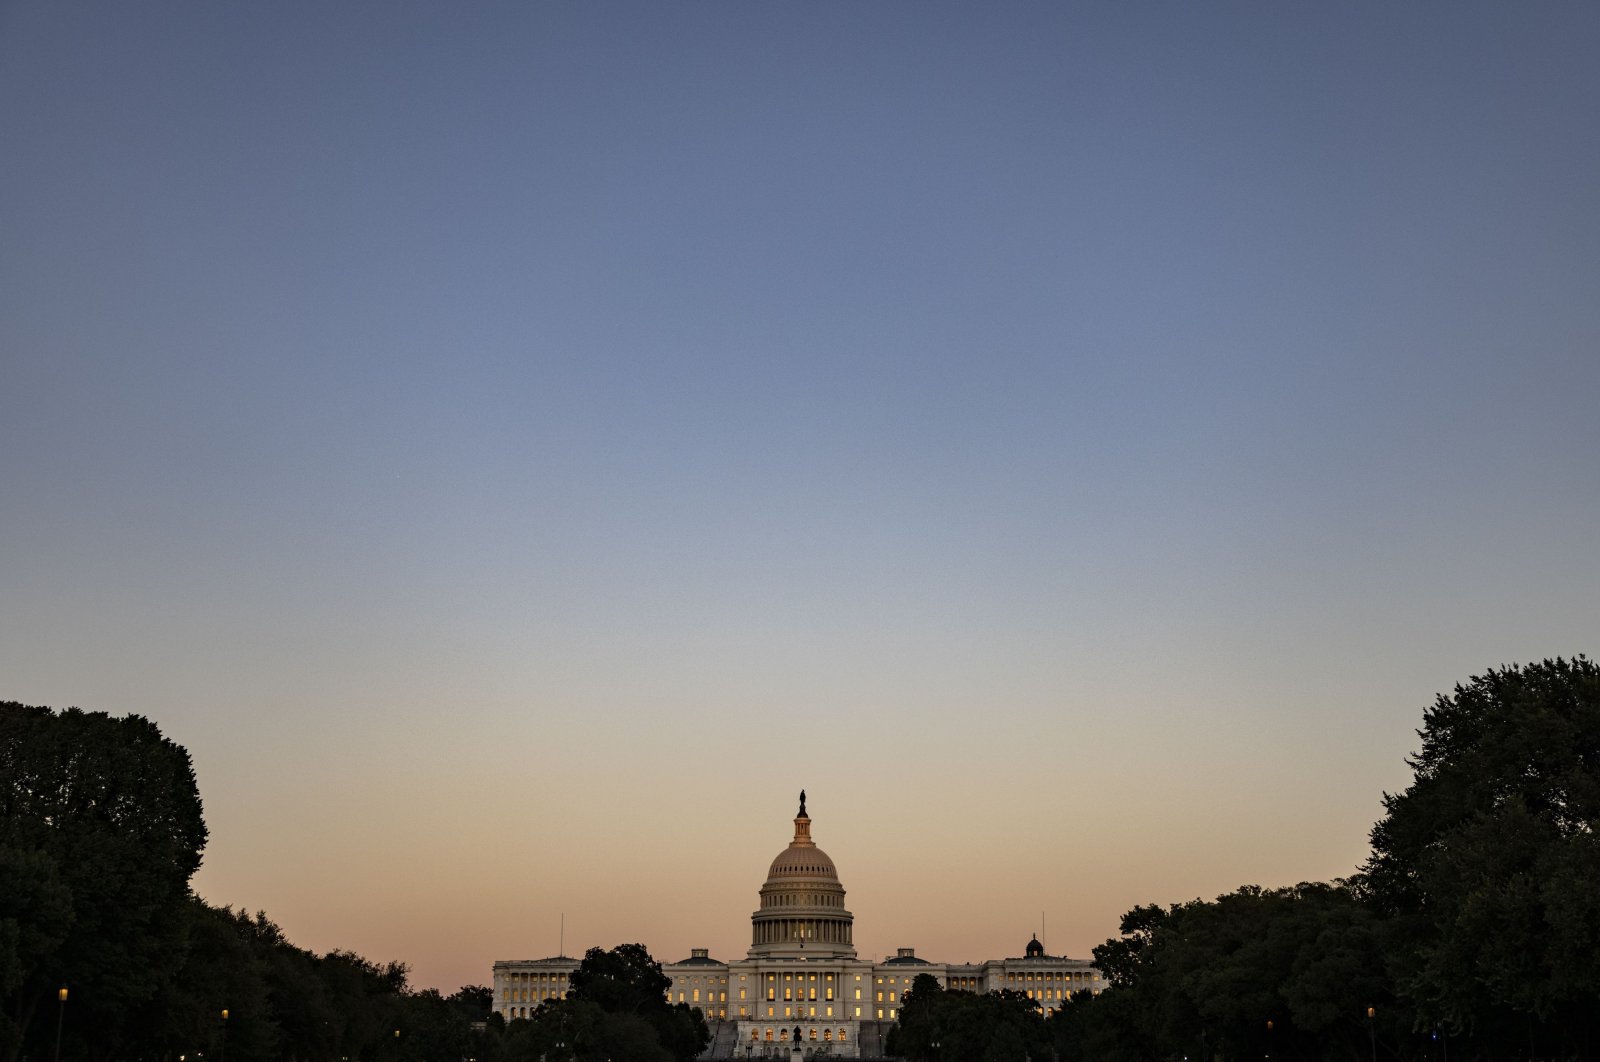 The U.S. Capitol building is seen down the National Mall as the sun sets in Washington, D.C., U.S., Sept. 26, 2021. (AFP Photo)